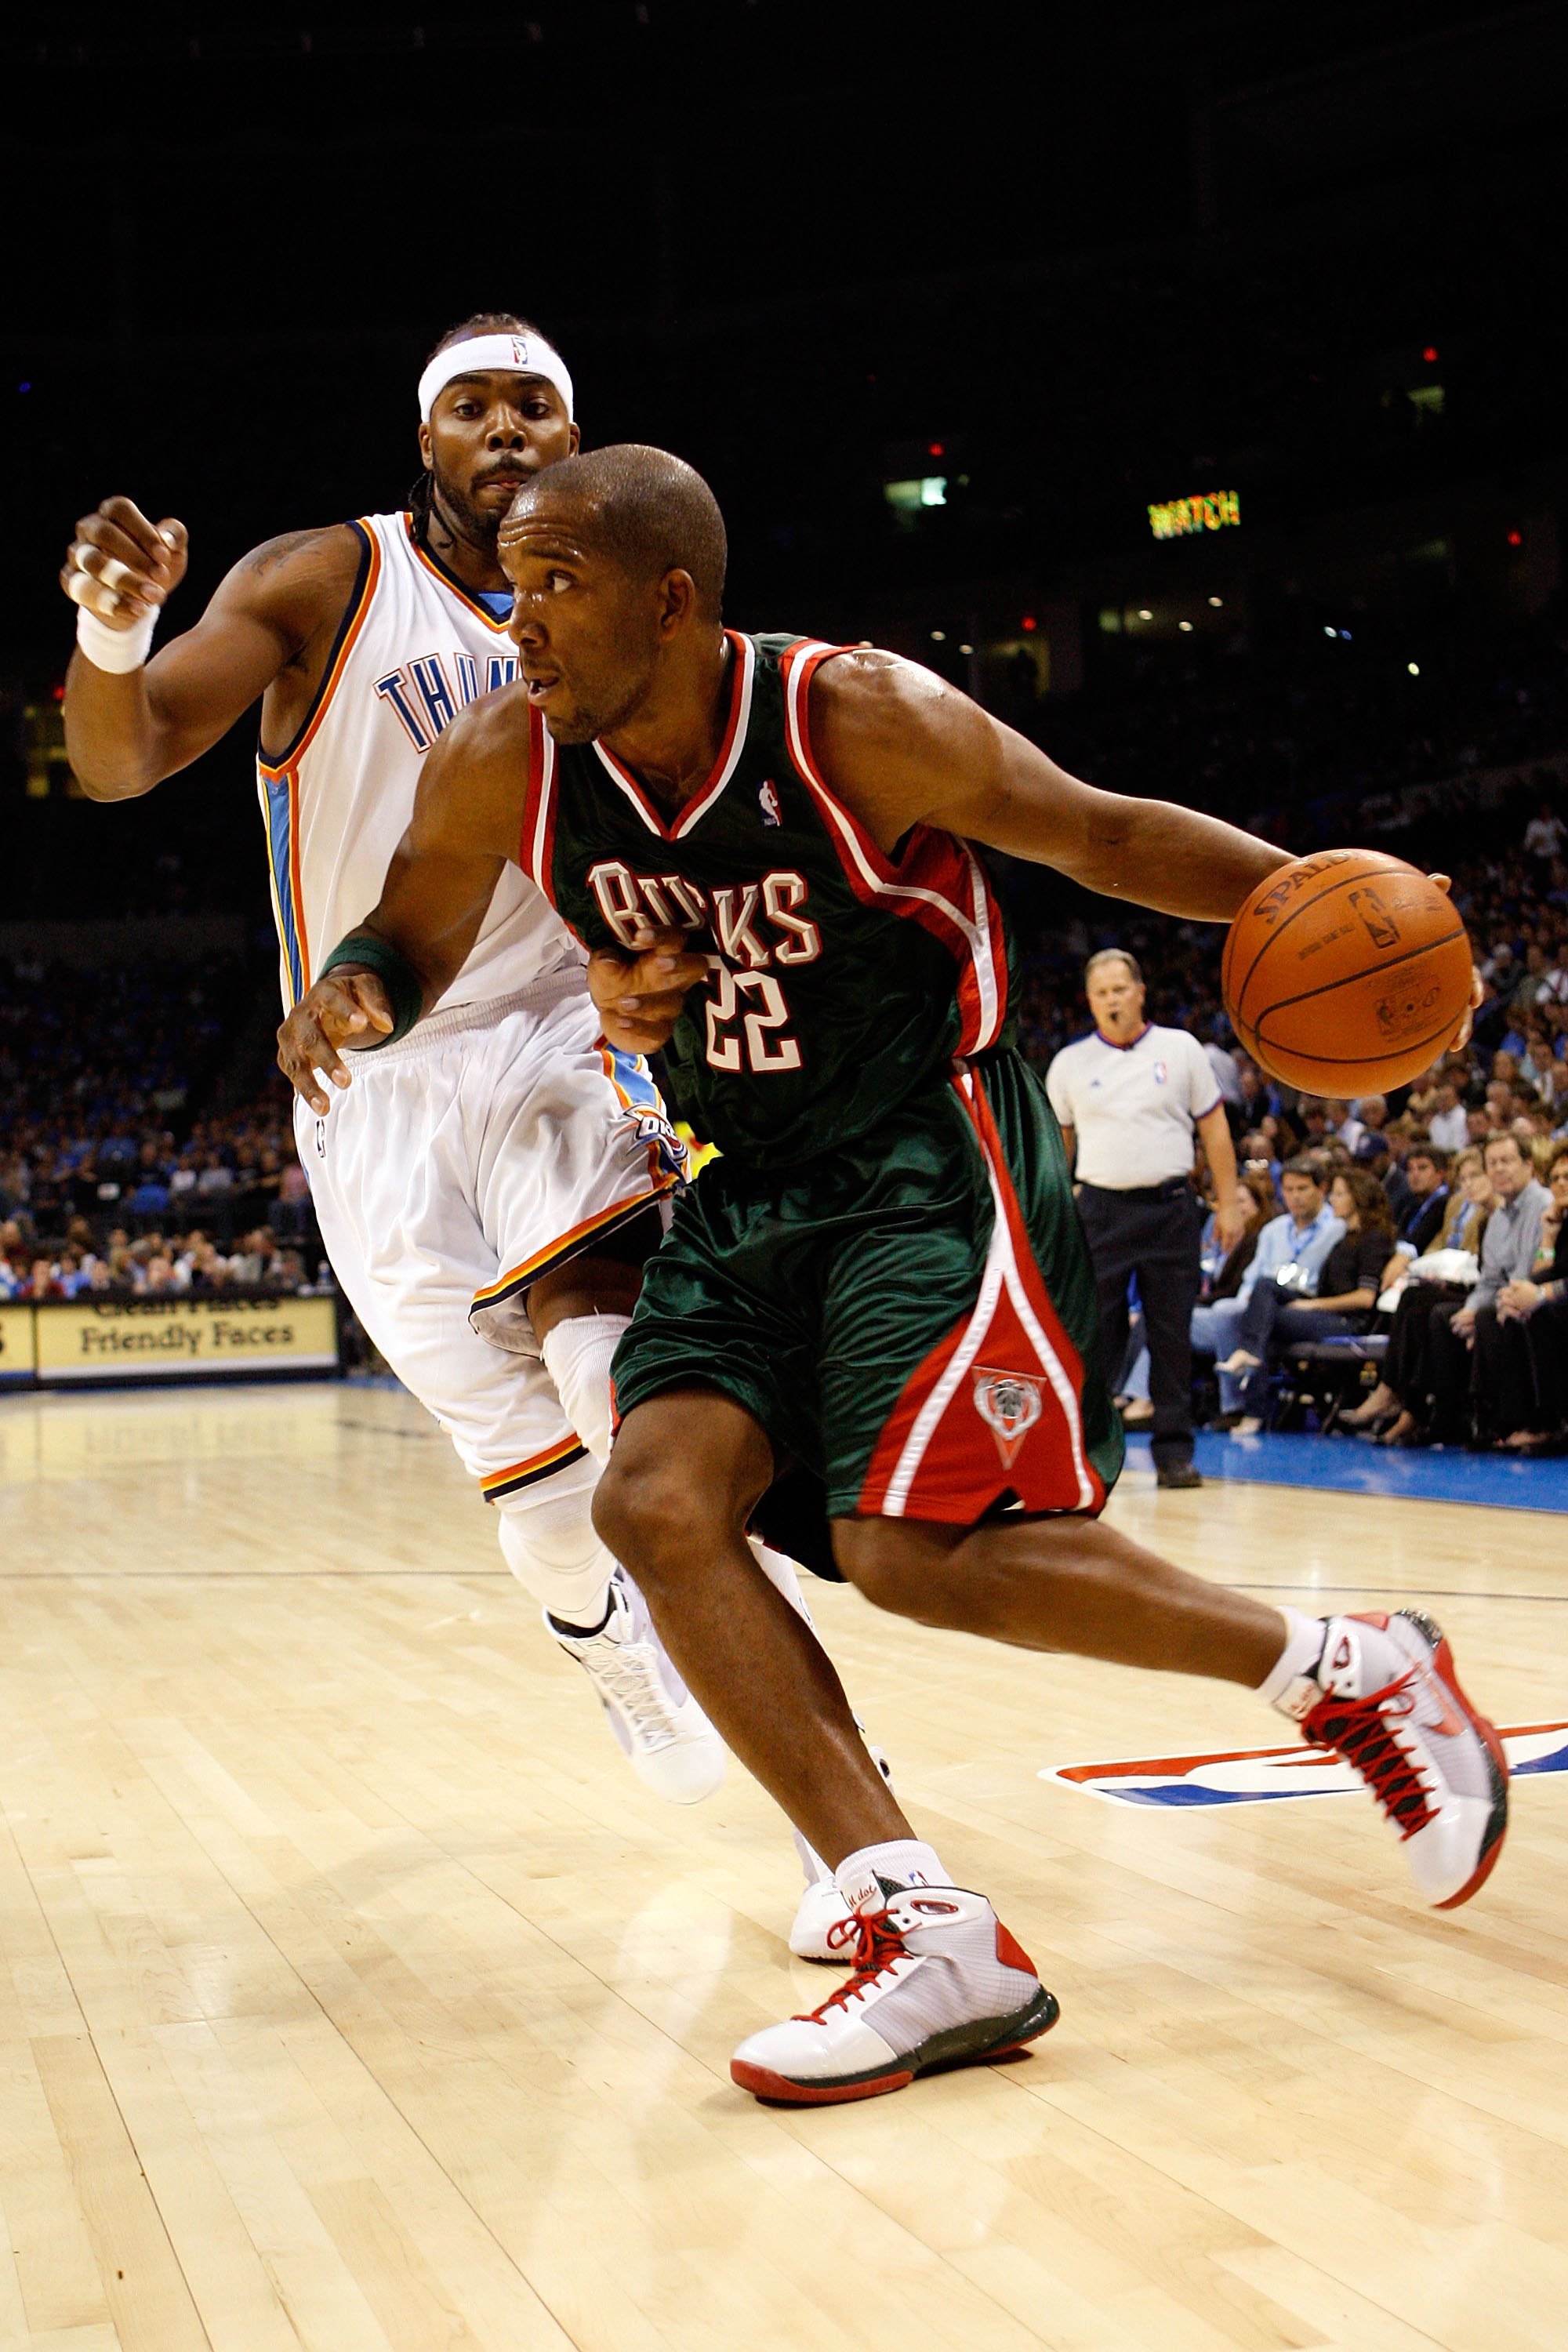 OKLAHOMA CITY - OCTOBER 29:  Michael Redd #22 of the Milwaukee Bucks drives to the basket past Chris Wilcox #54 of the Oklahoma City Thunder at the Ford Center on October 29, 2008 in Oklahoma City, Oklahoma. The Bucks won 98-87.  NOTE TO USER: User expres